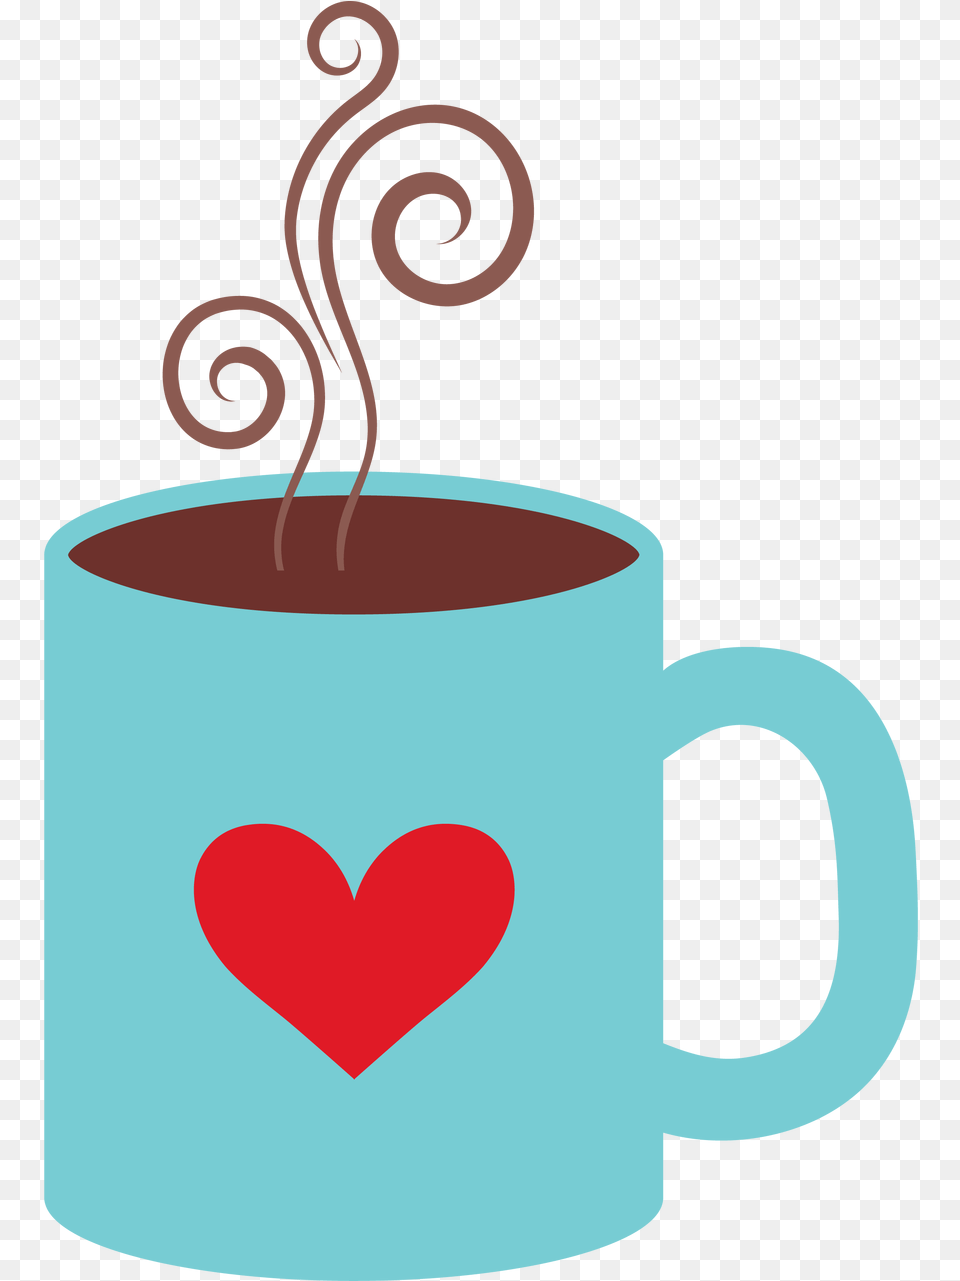 Hot Chocolate Mug Svg Cut File Coffee Cup, Beverage, Coffee Cup Free Transparent Png